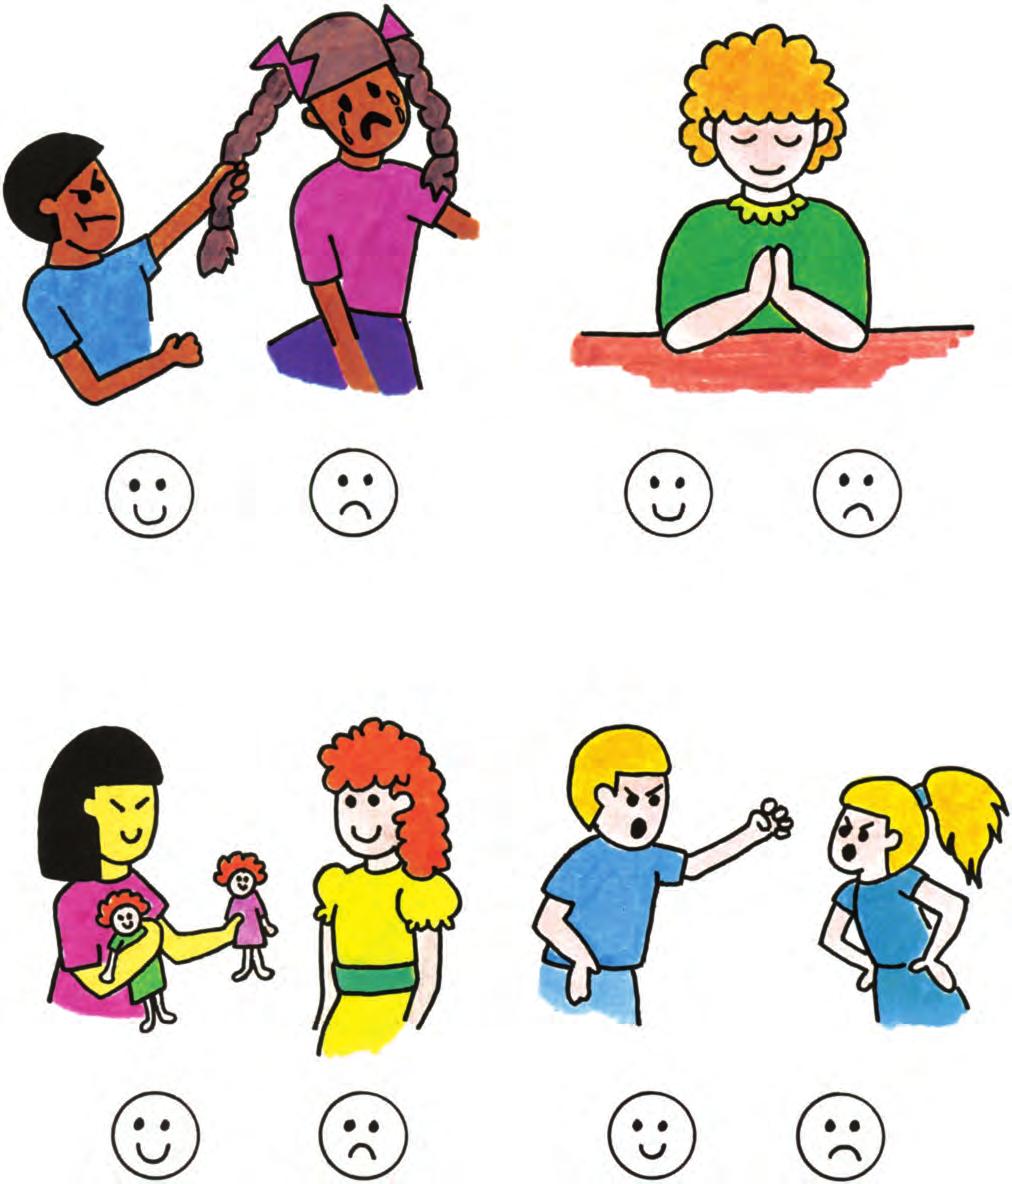 LESSON 4: ACTIONS AND ATTITUDES THE TEN COMMANDMENTS Directions: Color the happy face to